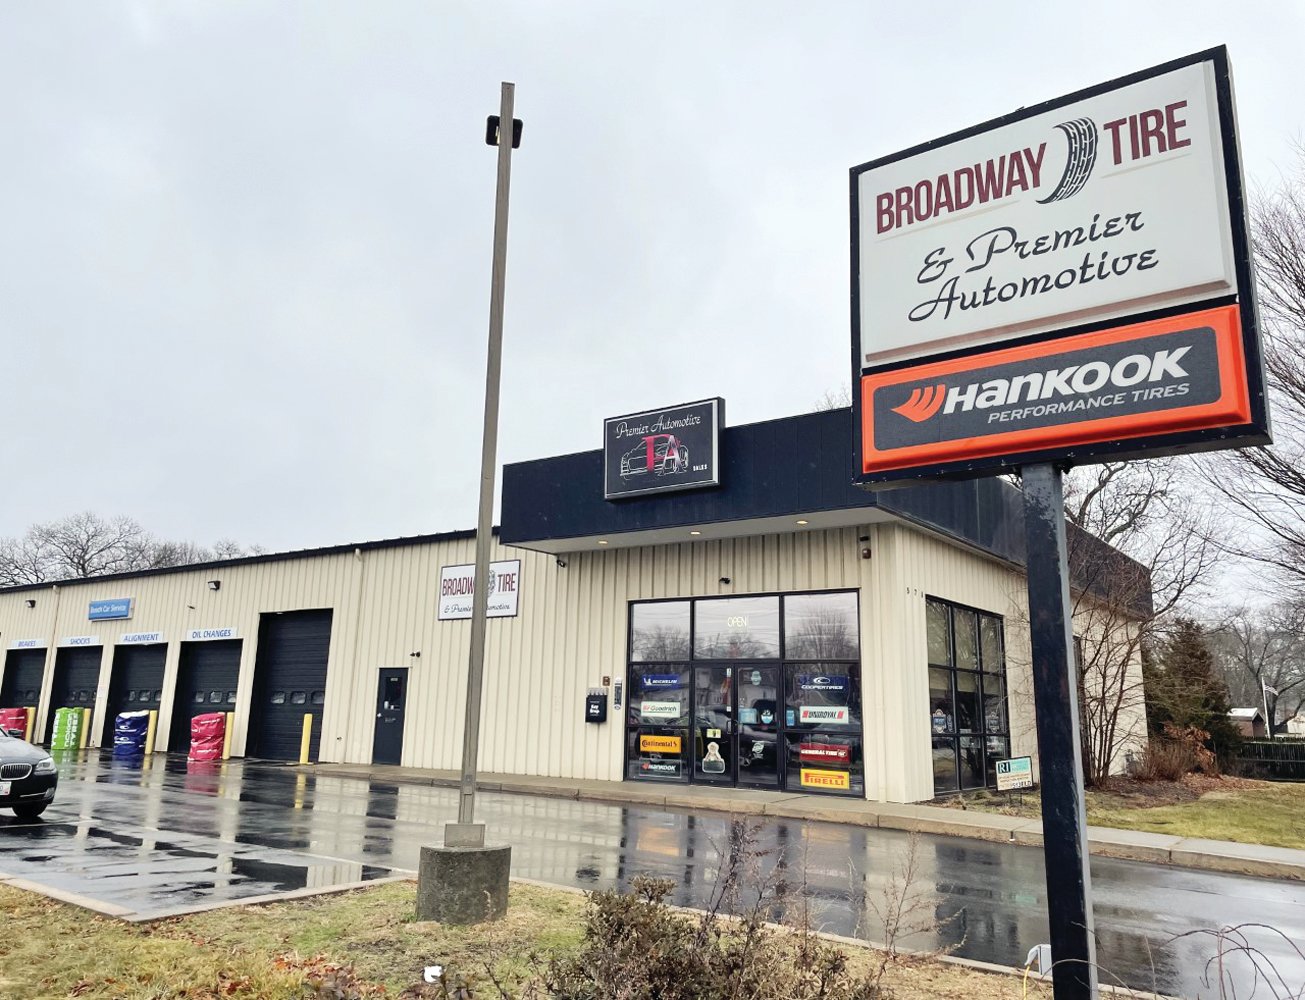 Check out Broadway Tire & Premier Automotive Services on Warwick Avenue for all your repair needs, from state inspections to oil changes and so much more. Call today to keep your vehicle on the road safely this spring ~ and beyond!